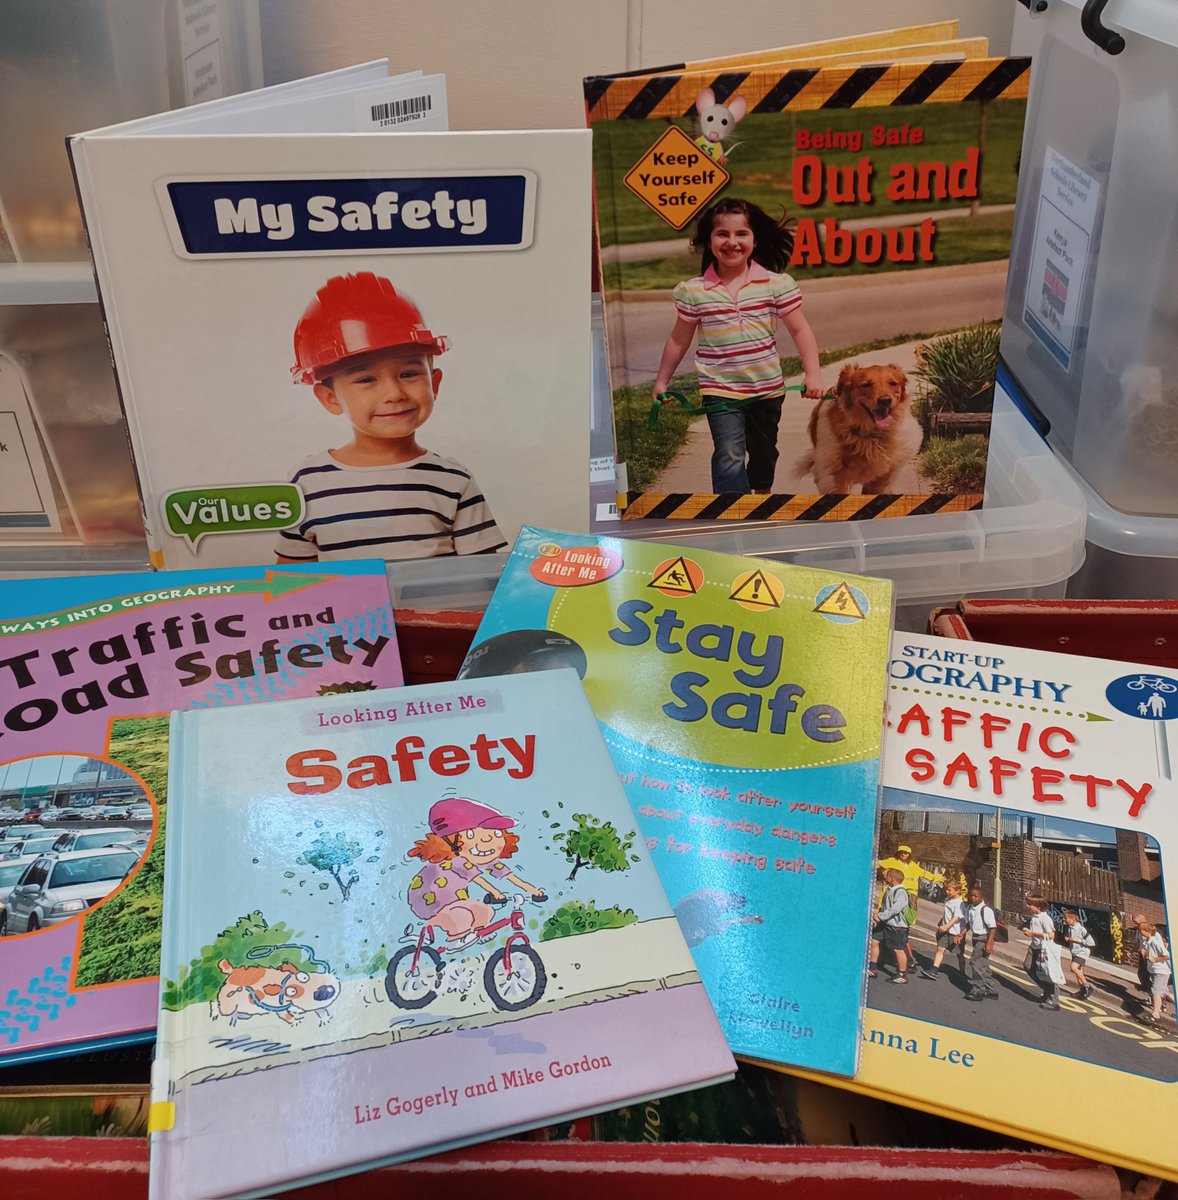 What a busy world we live in, one minute it is World Environment day and the next  it is Child Safety Week!
#safety  #RoadSafetyWeek  #Children  #books  #readingschools  #literacy  #education